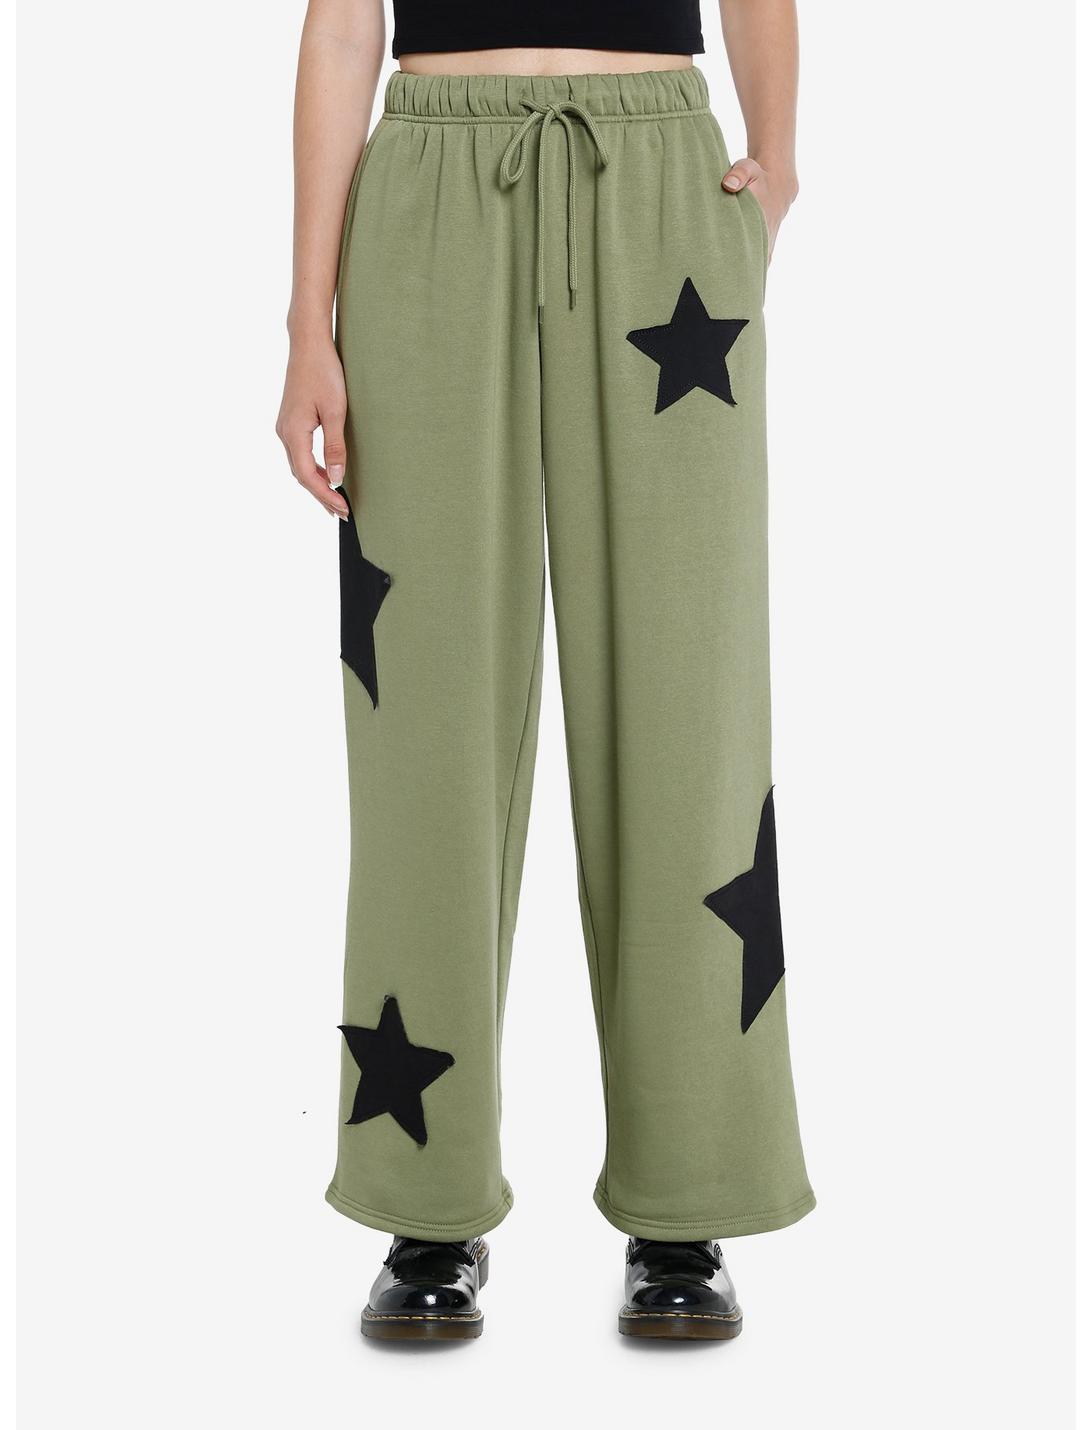 Social Collision Star Patch Girls Lounge Pants, GREEN, hi-res